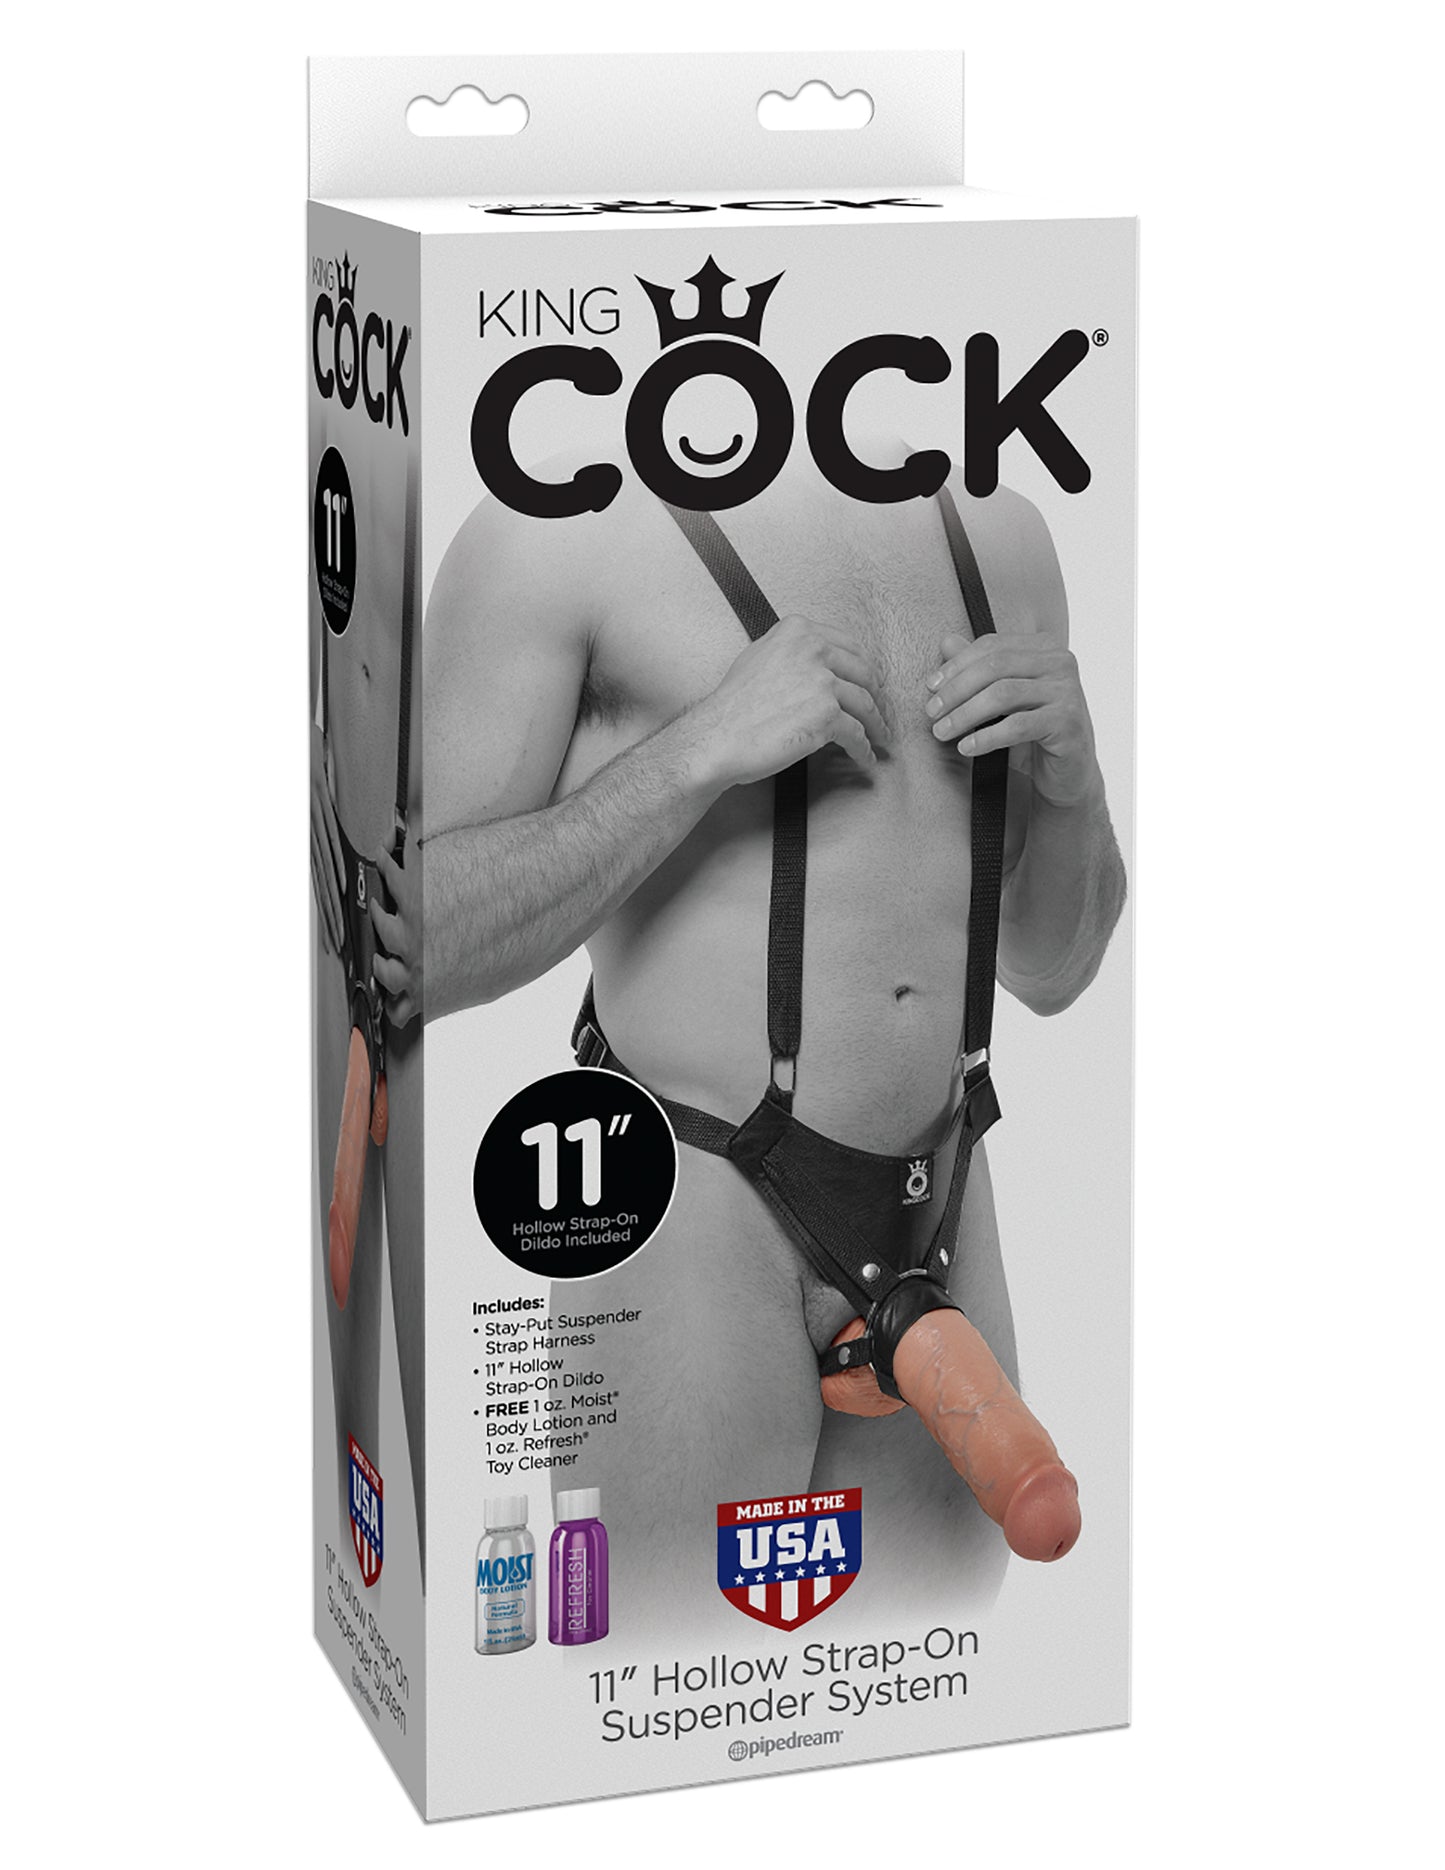 King Cock Hollow Strap-On Suspender System